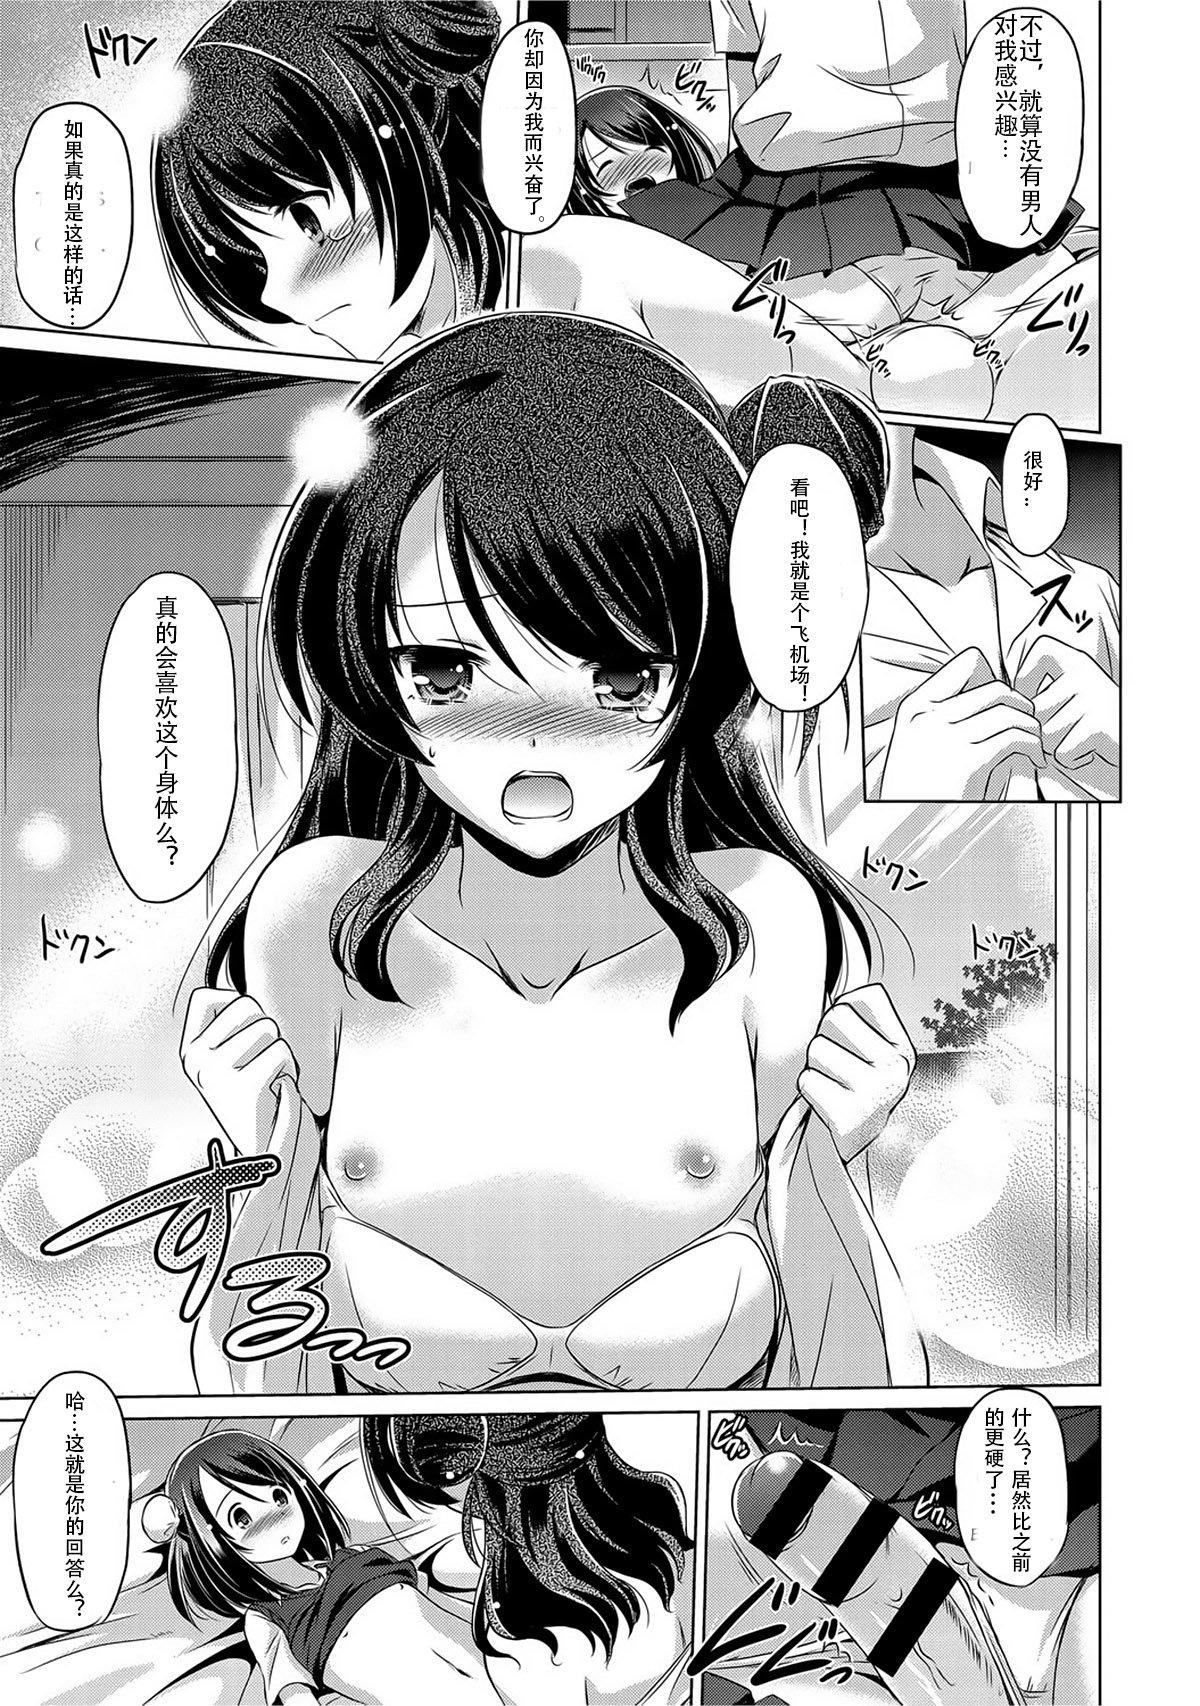 Funny Minna no Hoshii Mono | The Thing that Everyone Wants Rough Porn - Page 9